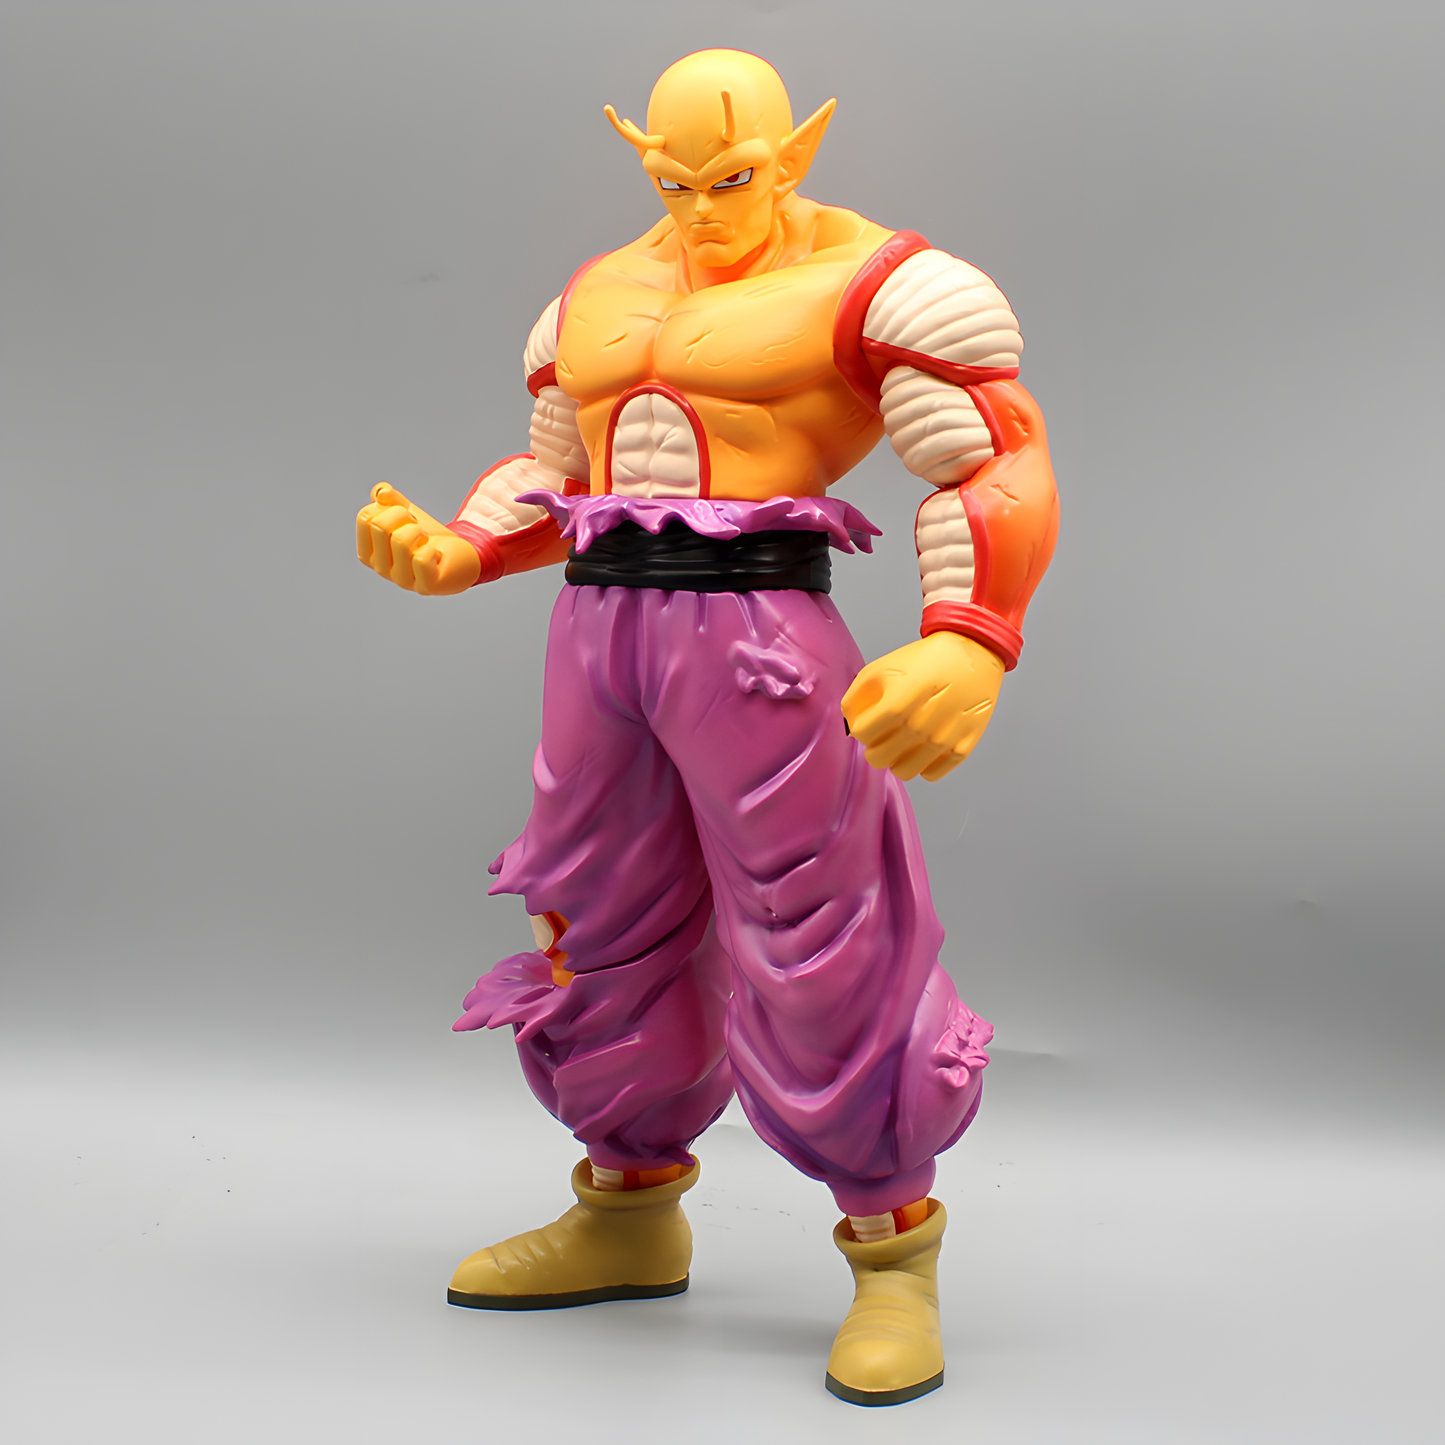 Detailed Dragon Ball figure of Piccolo in combat-ready stance, featuring his signature purple pants and pointed ears, against a neutral background.